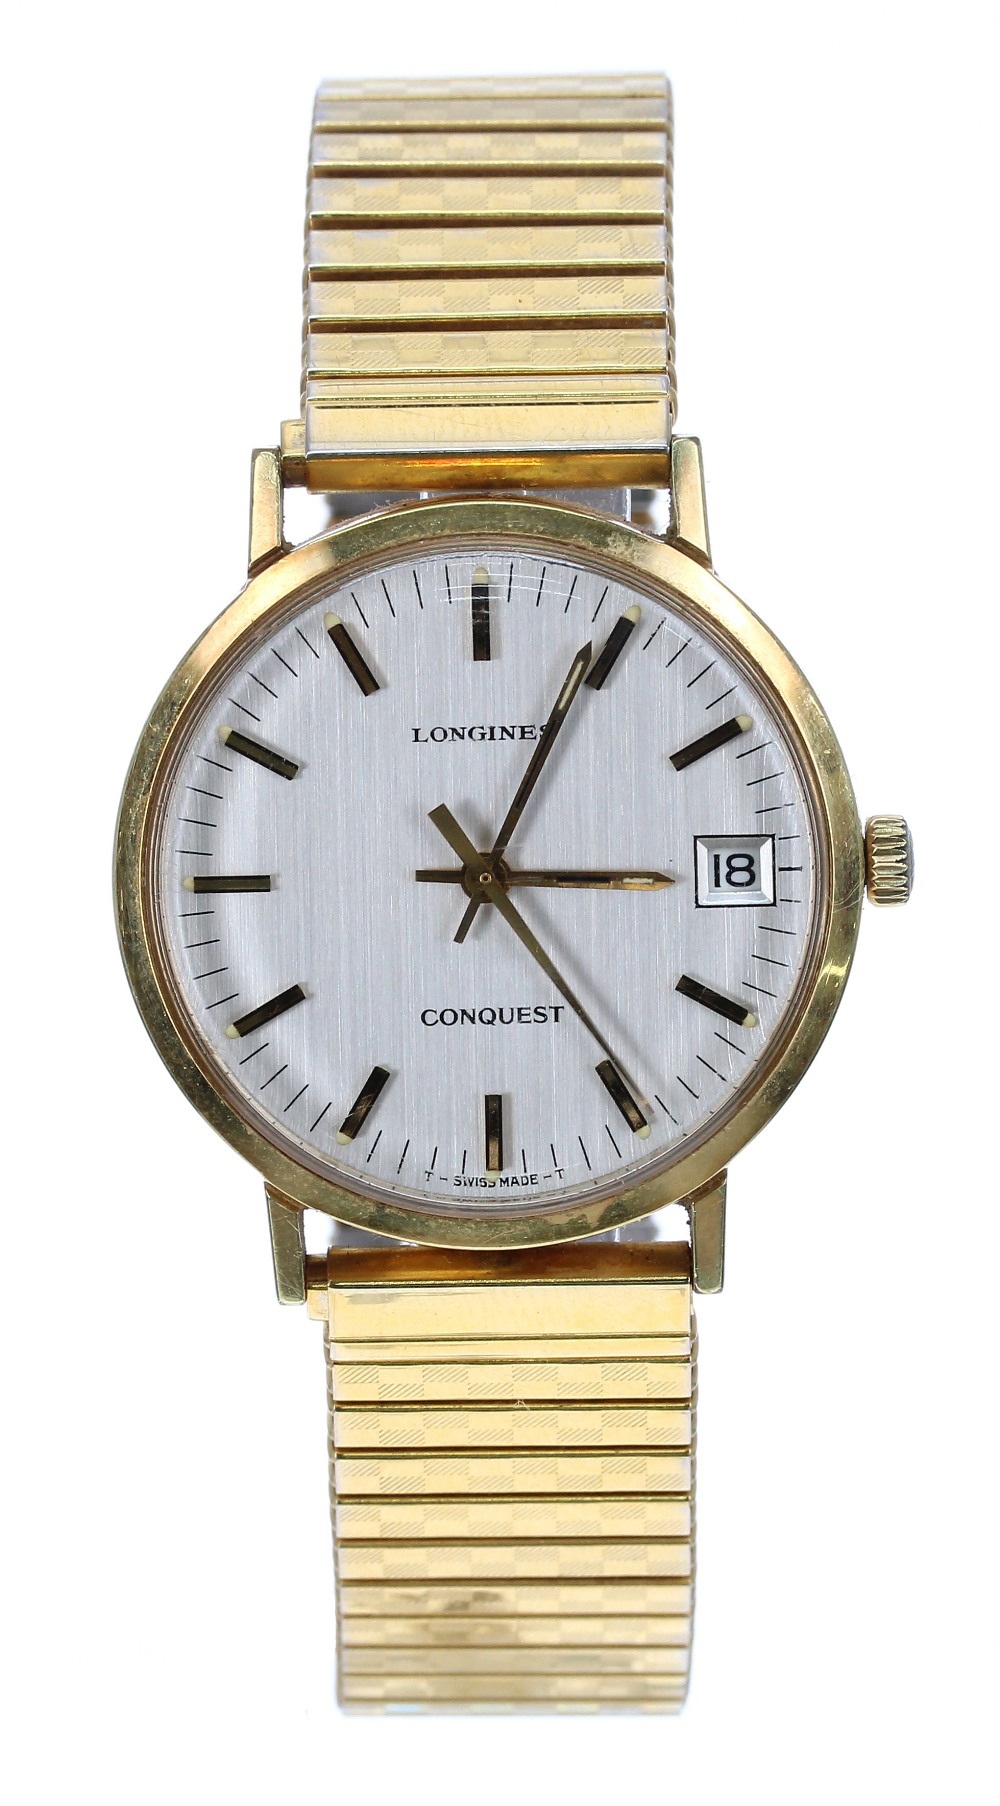 Longines Conquest gold plated and stainless steel gentleman's bracelet watch, ref. 1505-2 866,